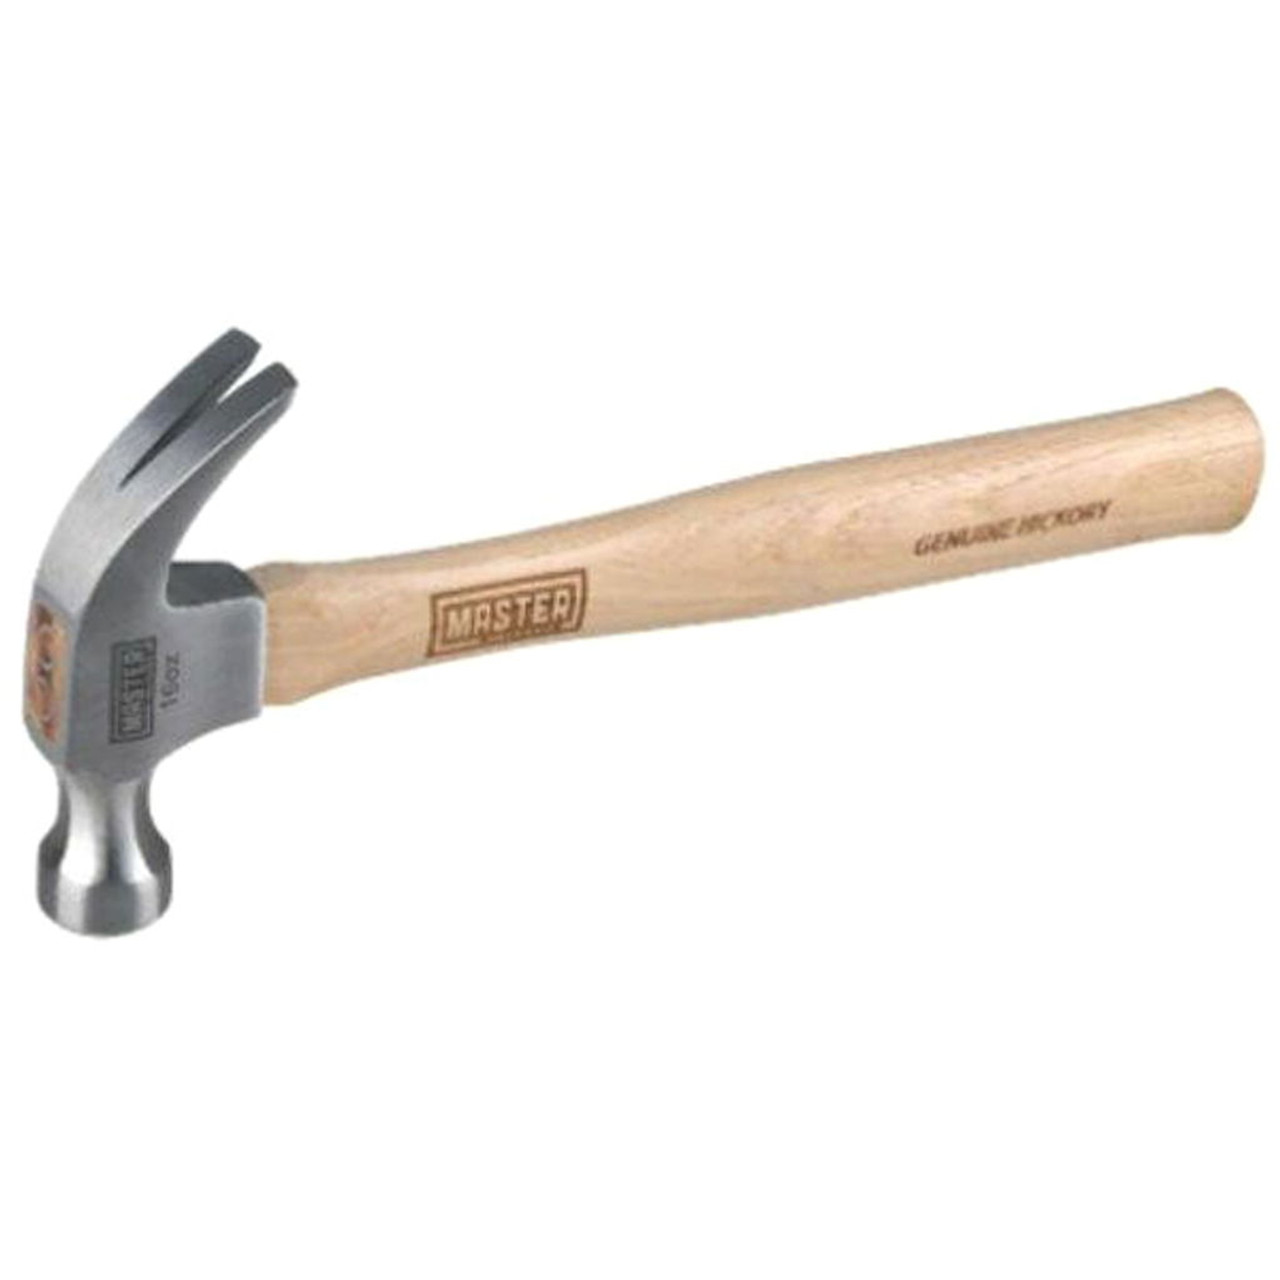 Master Mechanic Hickory Handle Curved Claw Hammer